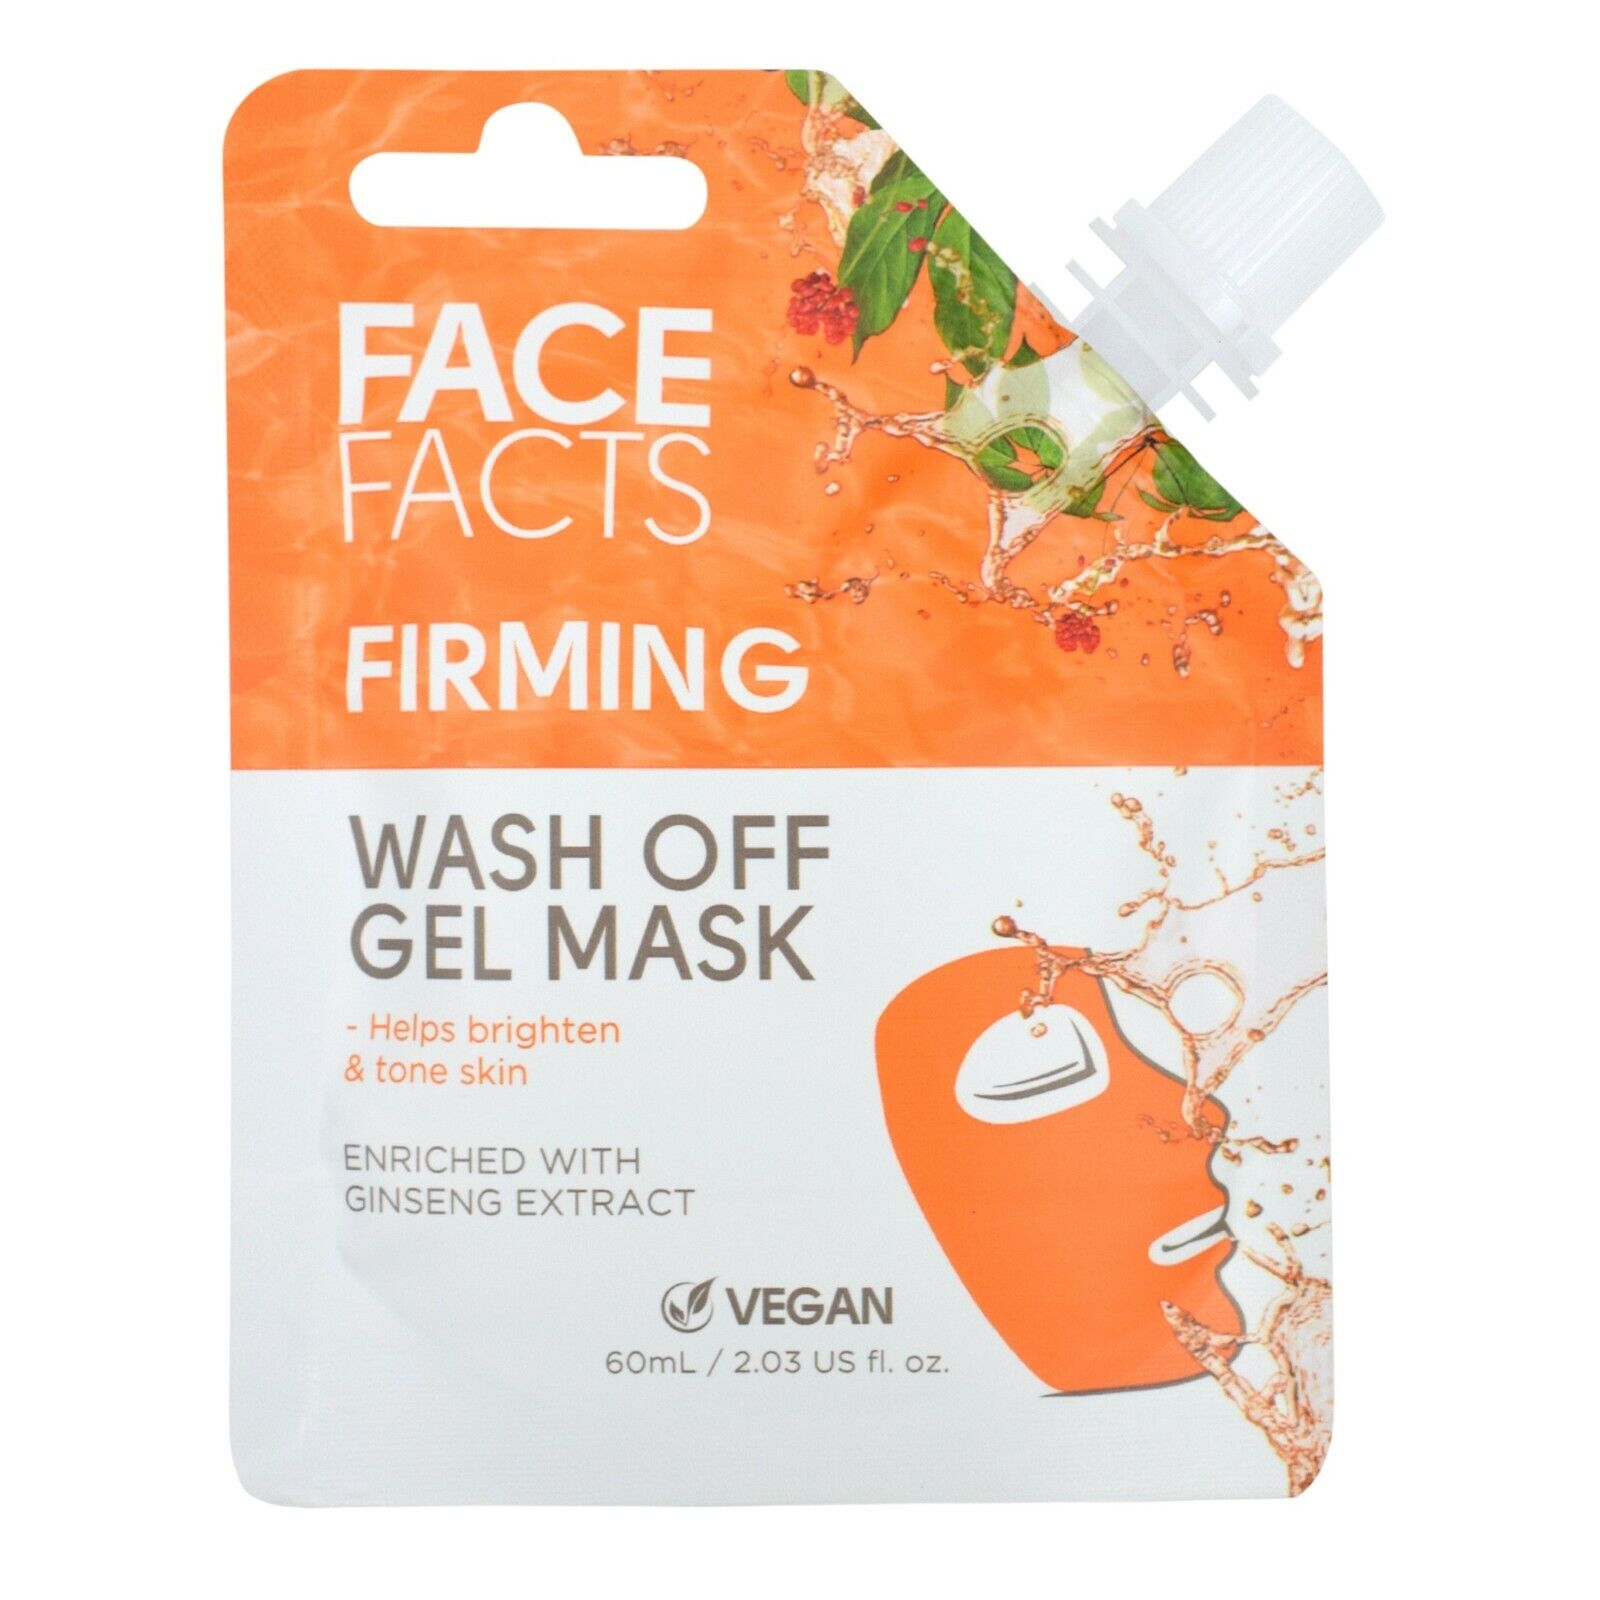 Face Facts Face Masks Mud Clay Gel Mask Wash OR Peel Off -All Skin Types Vegan ✓